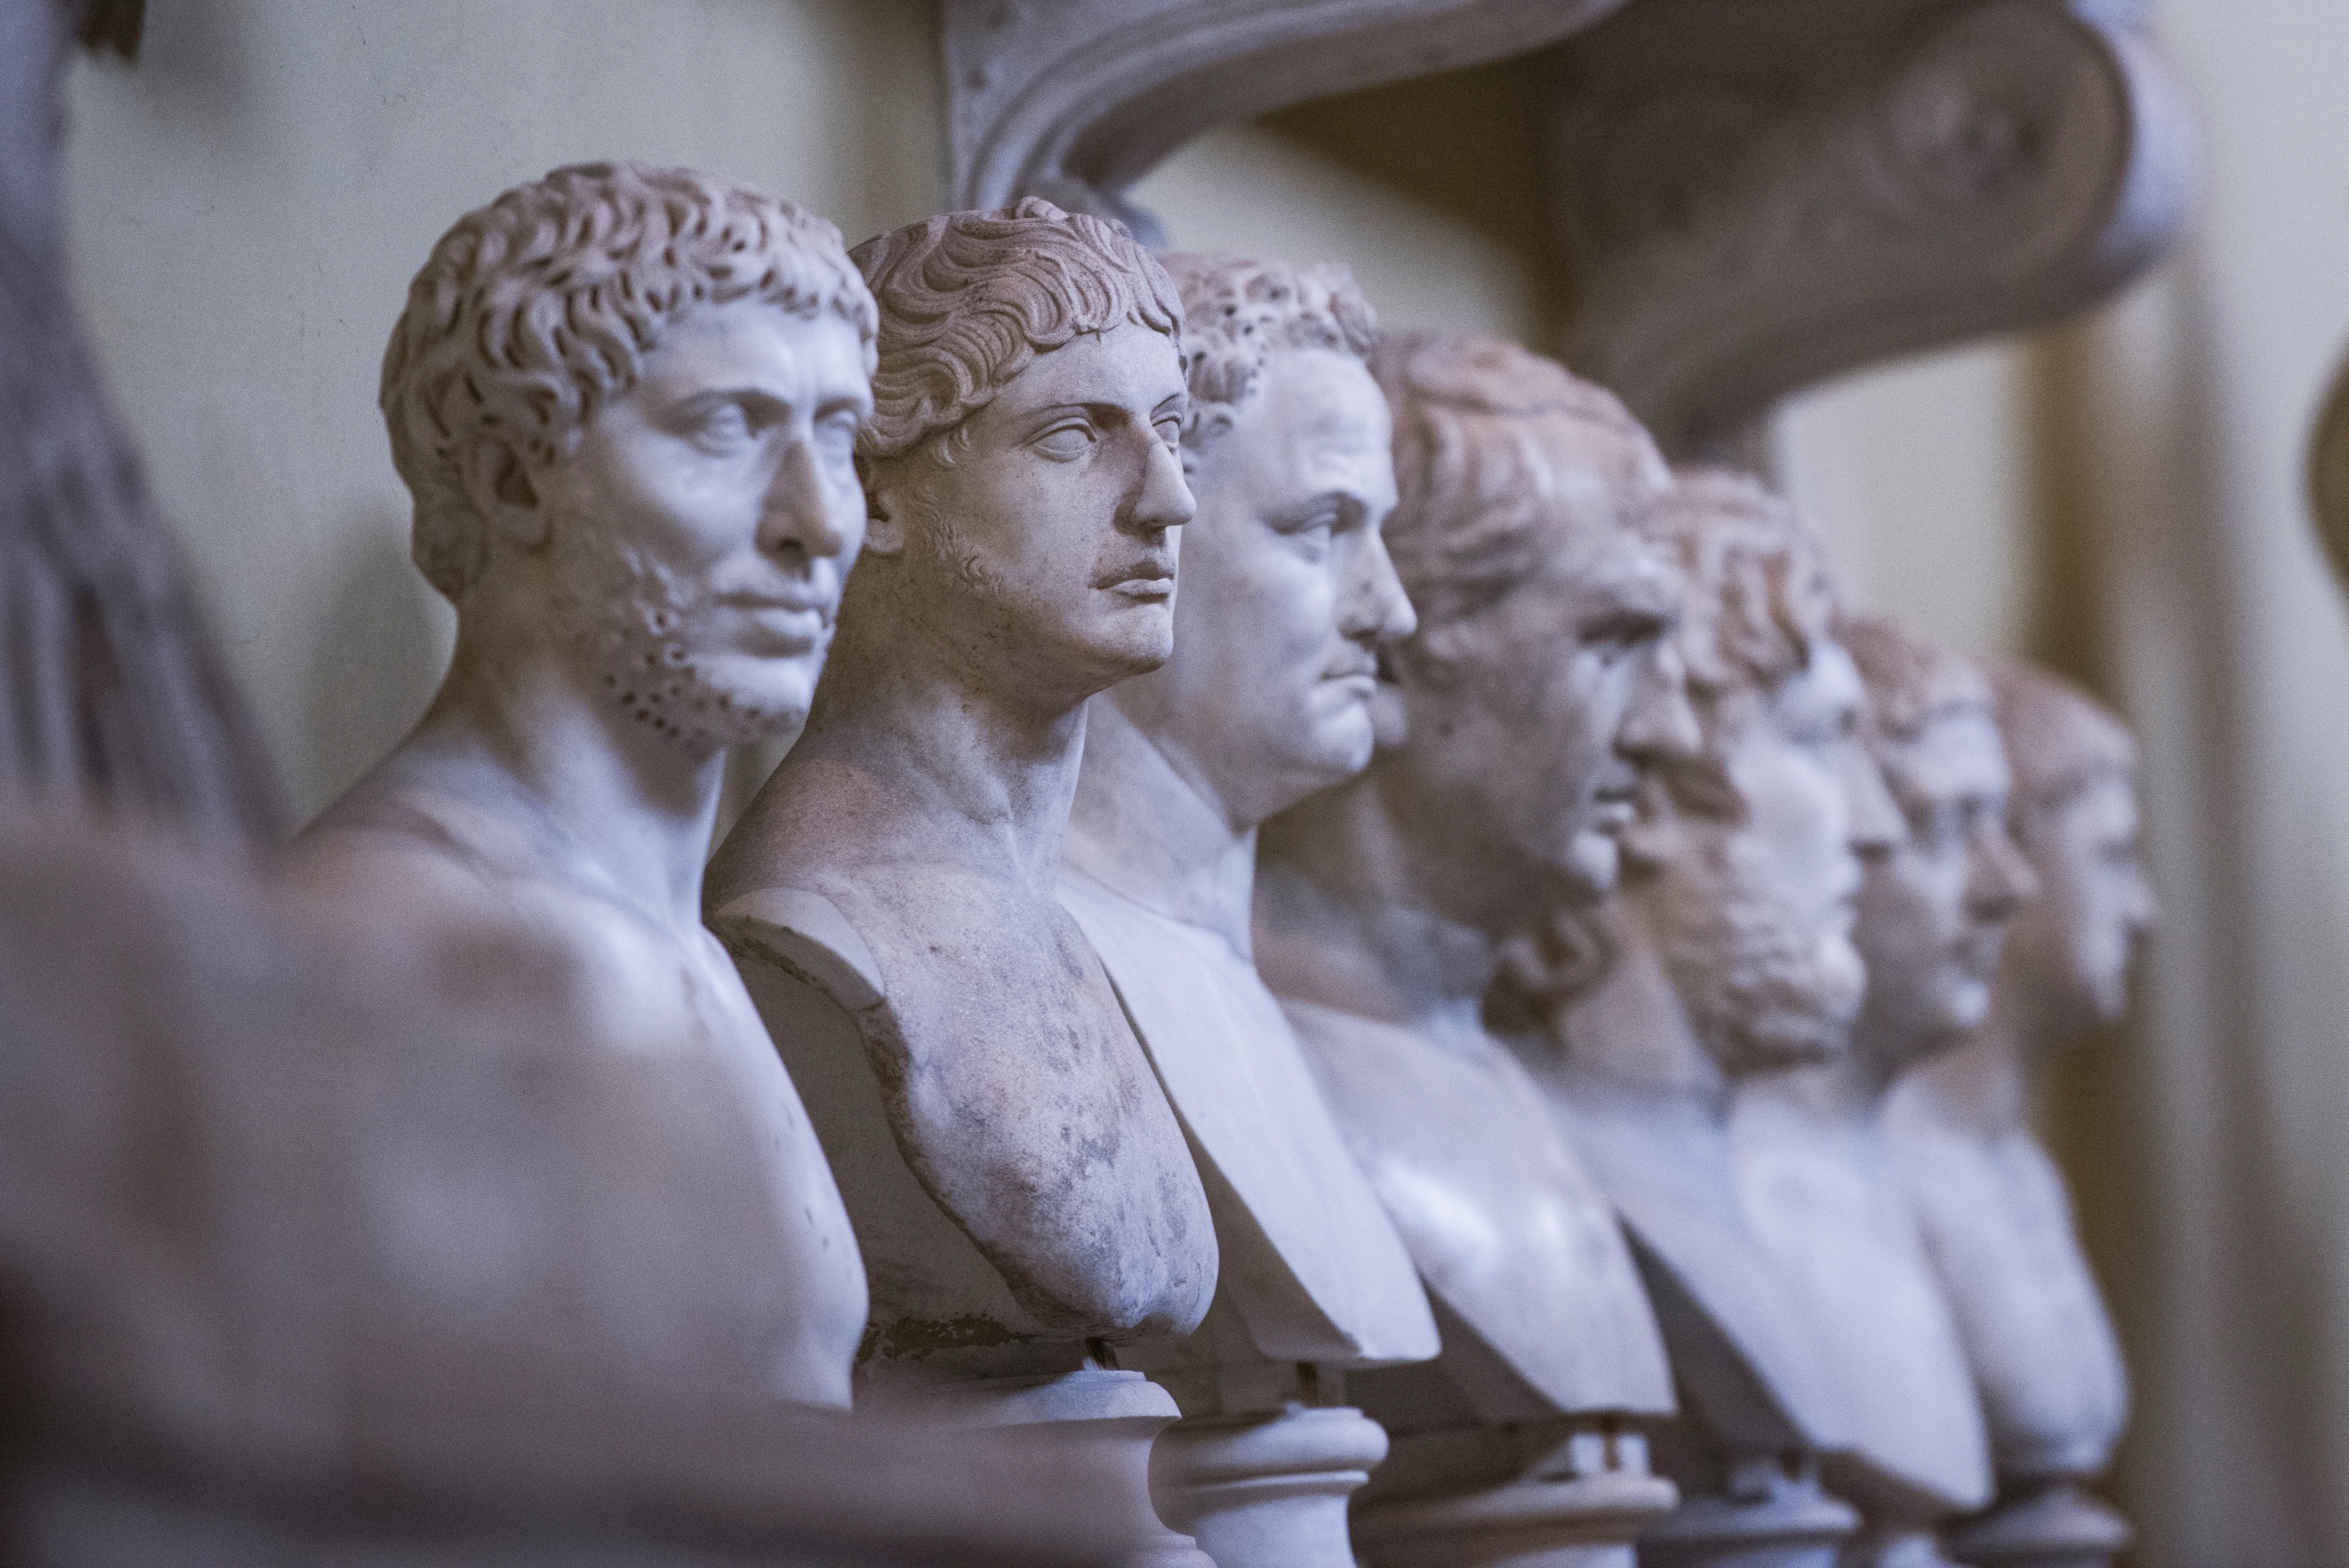 A row of marble Greek busts displayed in a museum.